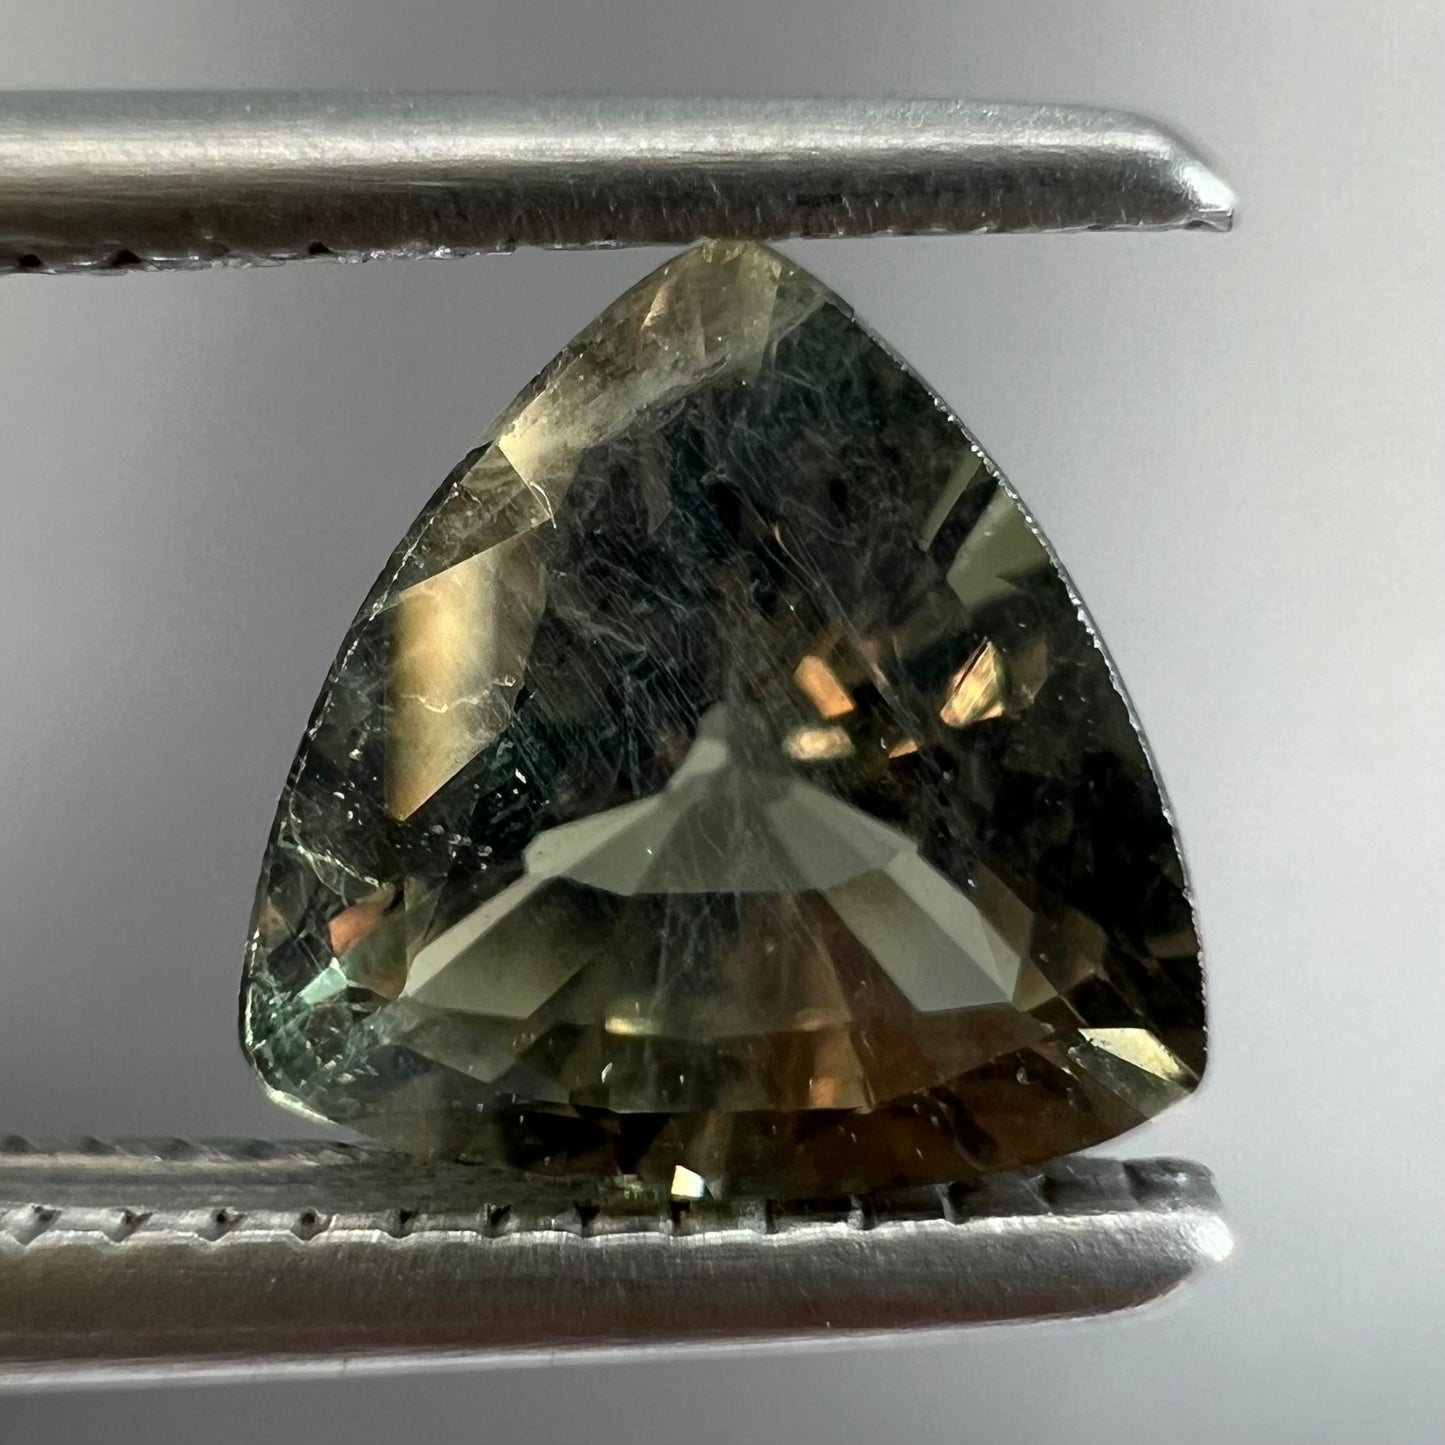 A natural, 1.10 carat, trillion cut alexandrite gemstone.  The stone changes colors from dark olive green to faint purplish green.